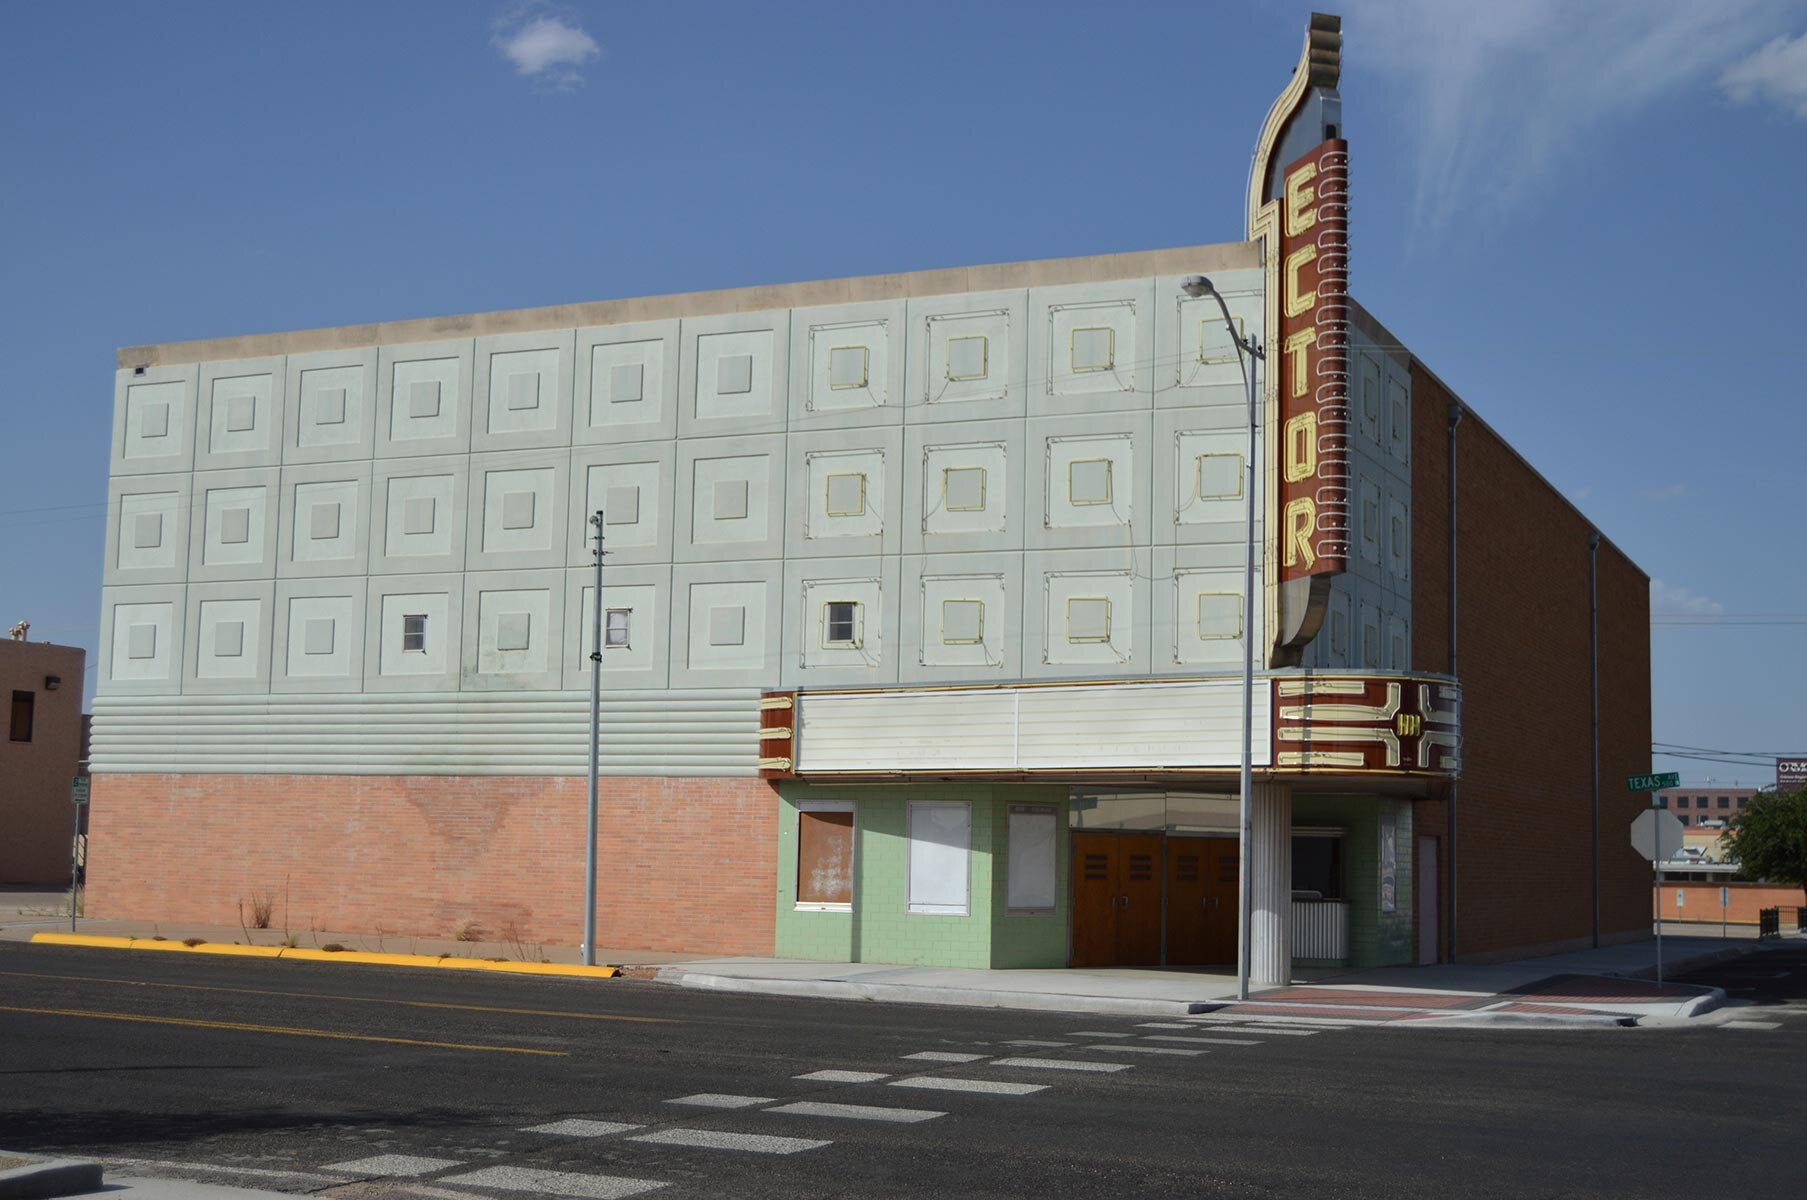 Ector County Theater, Odessa TX, 2014, July